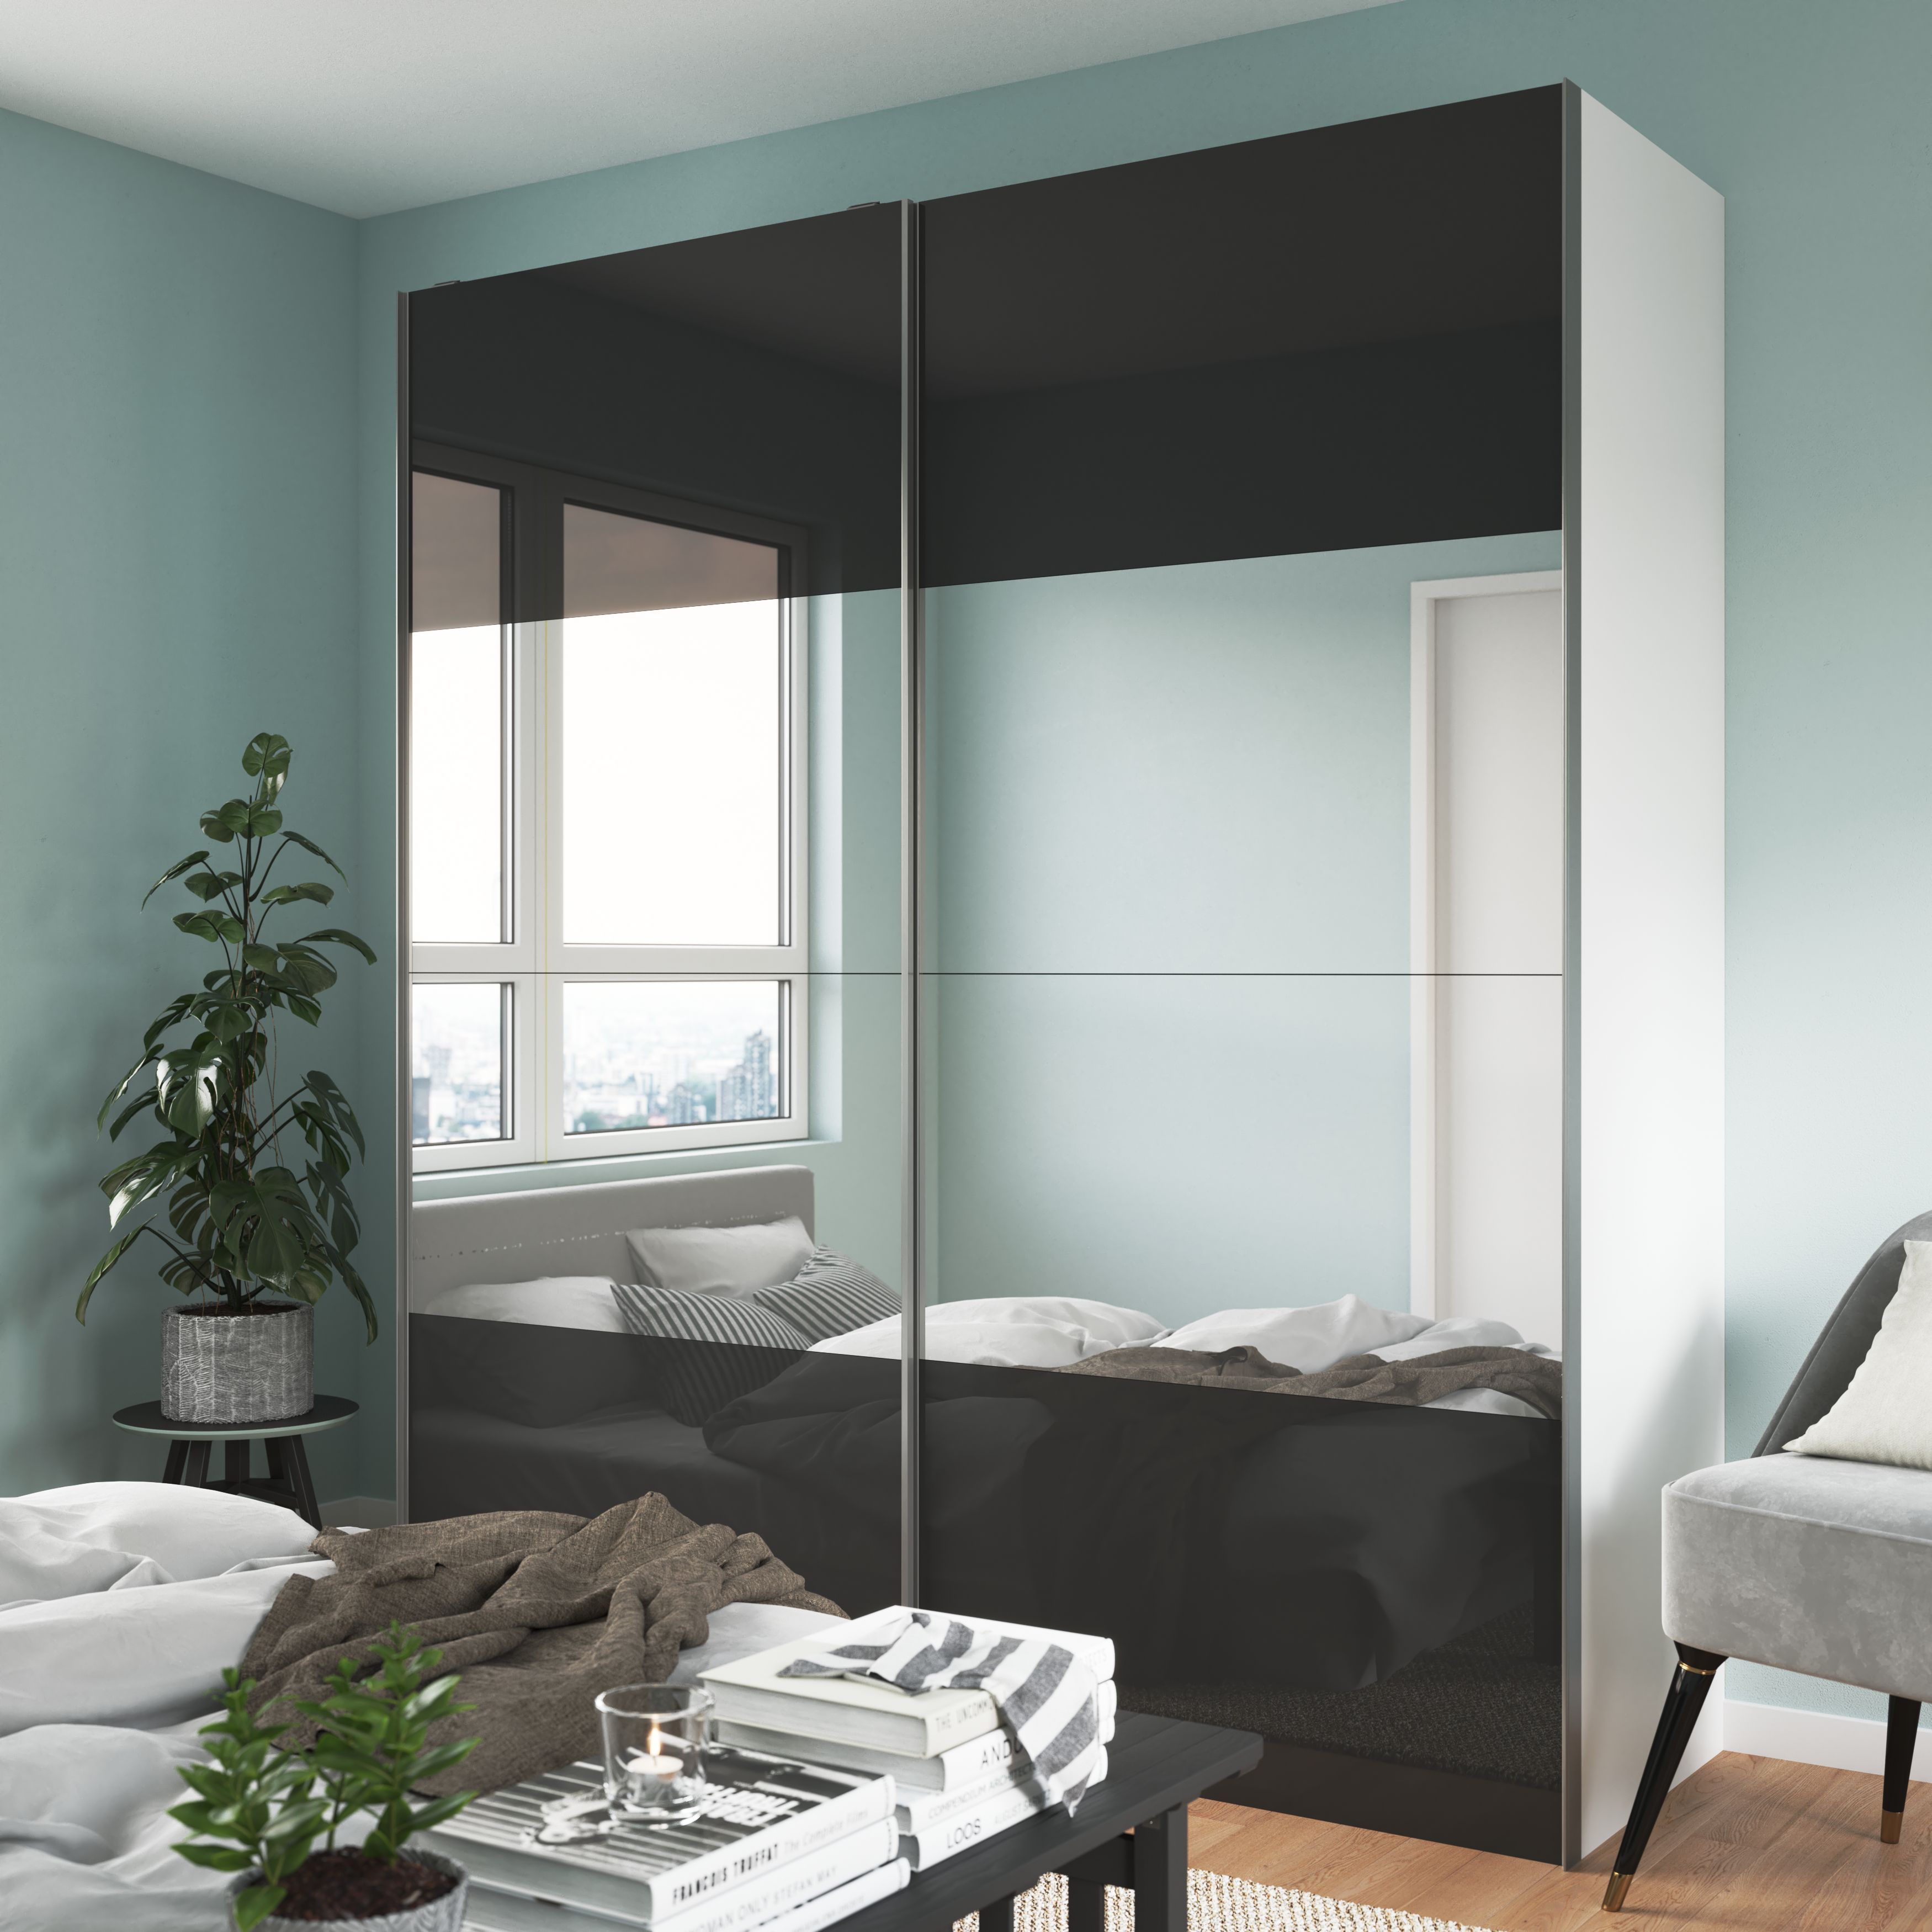 GoodHome Atomia Gloss Anthracite Sliding wardrobe door (H) 560mm x (W) 987mm, Pack of 4